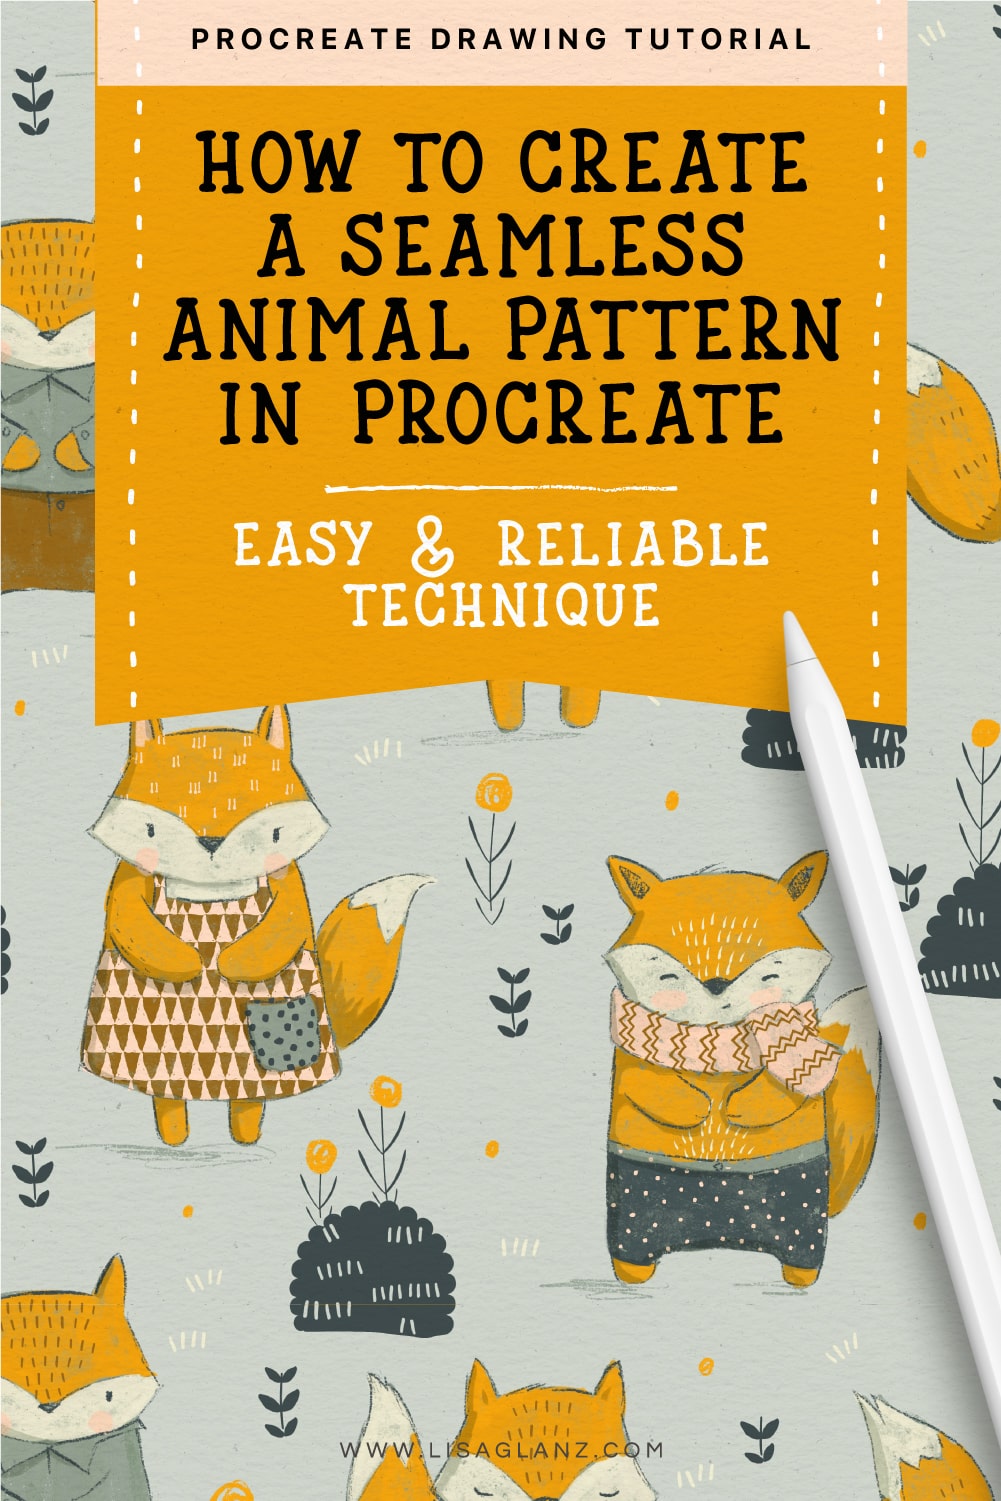 How to create a seamless animal pattern in Procreate